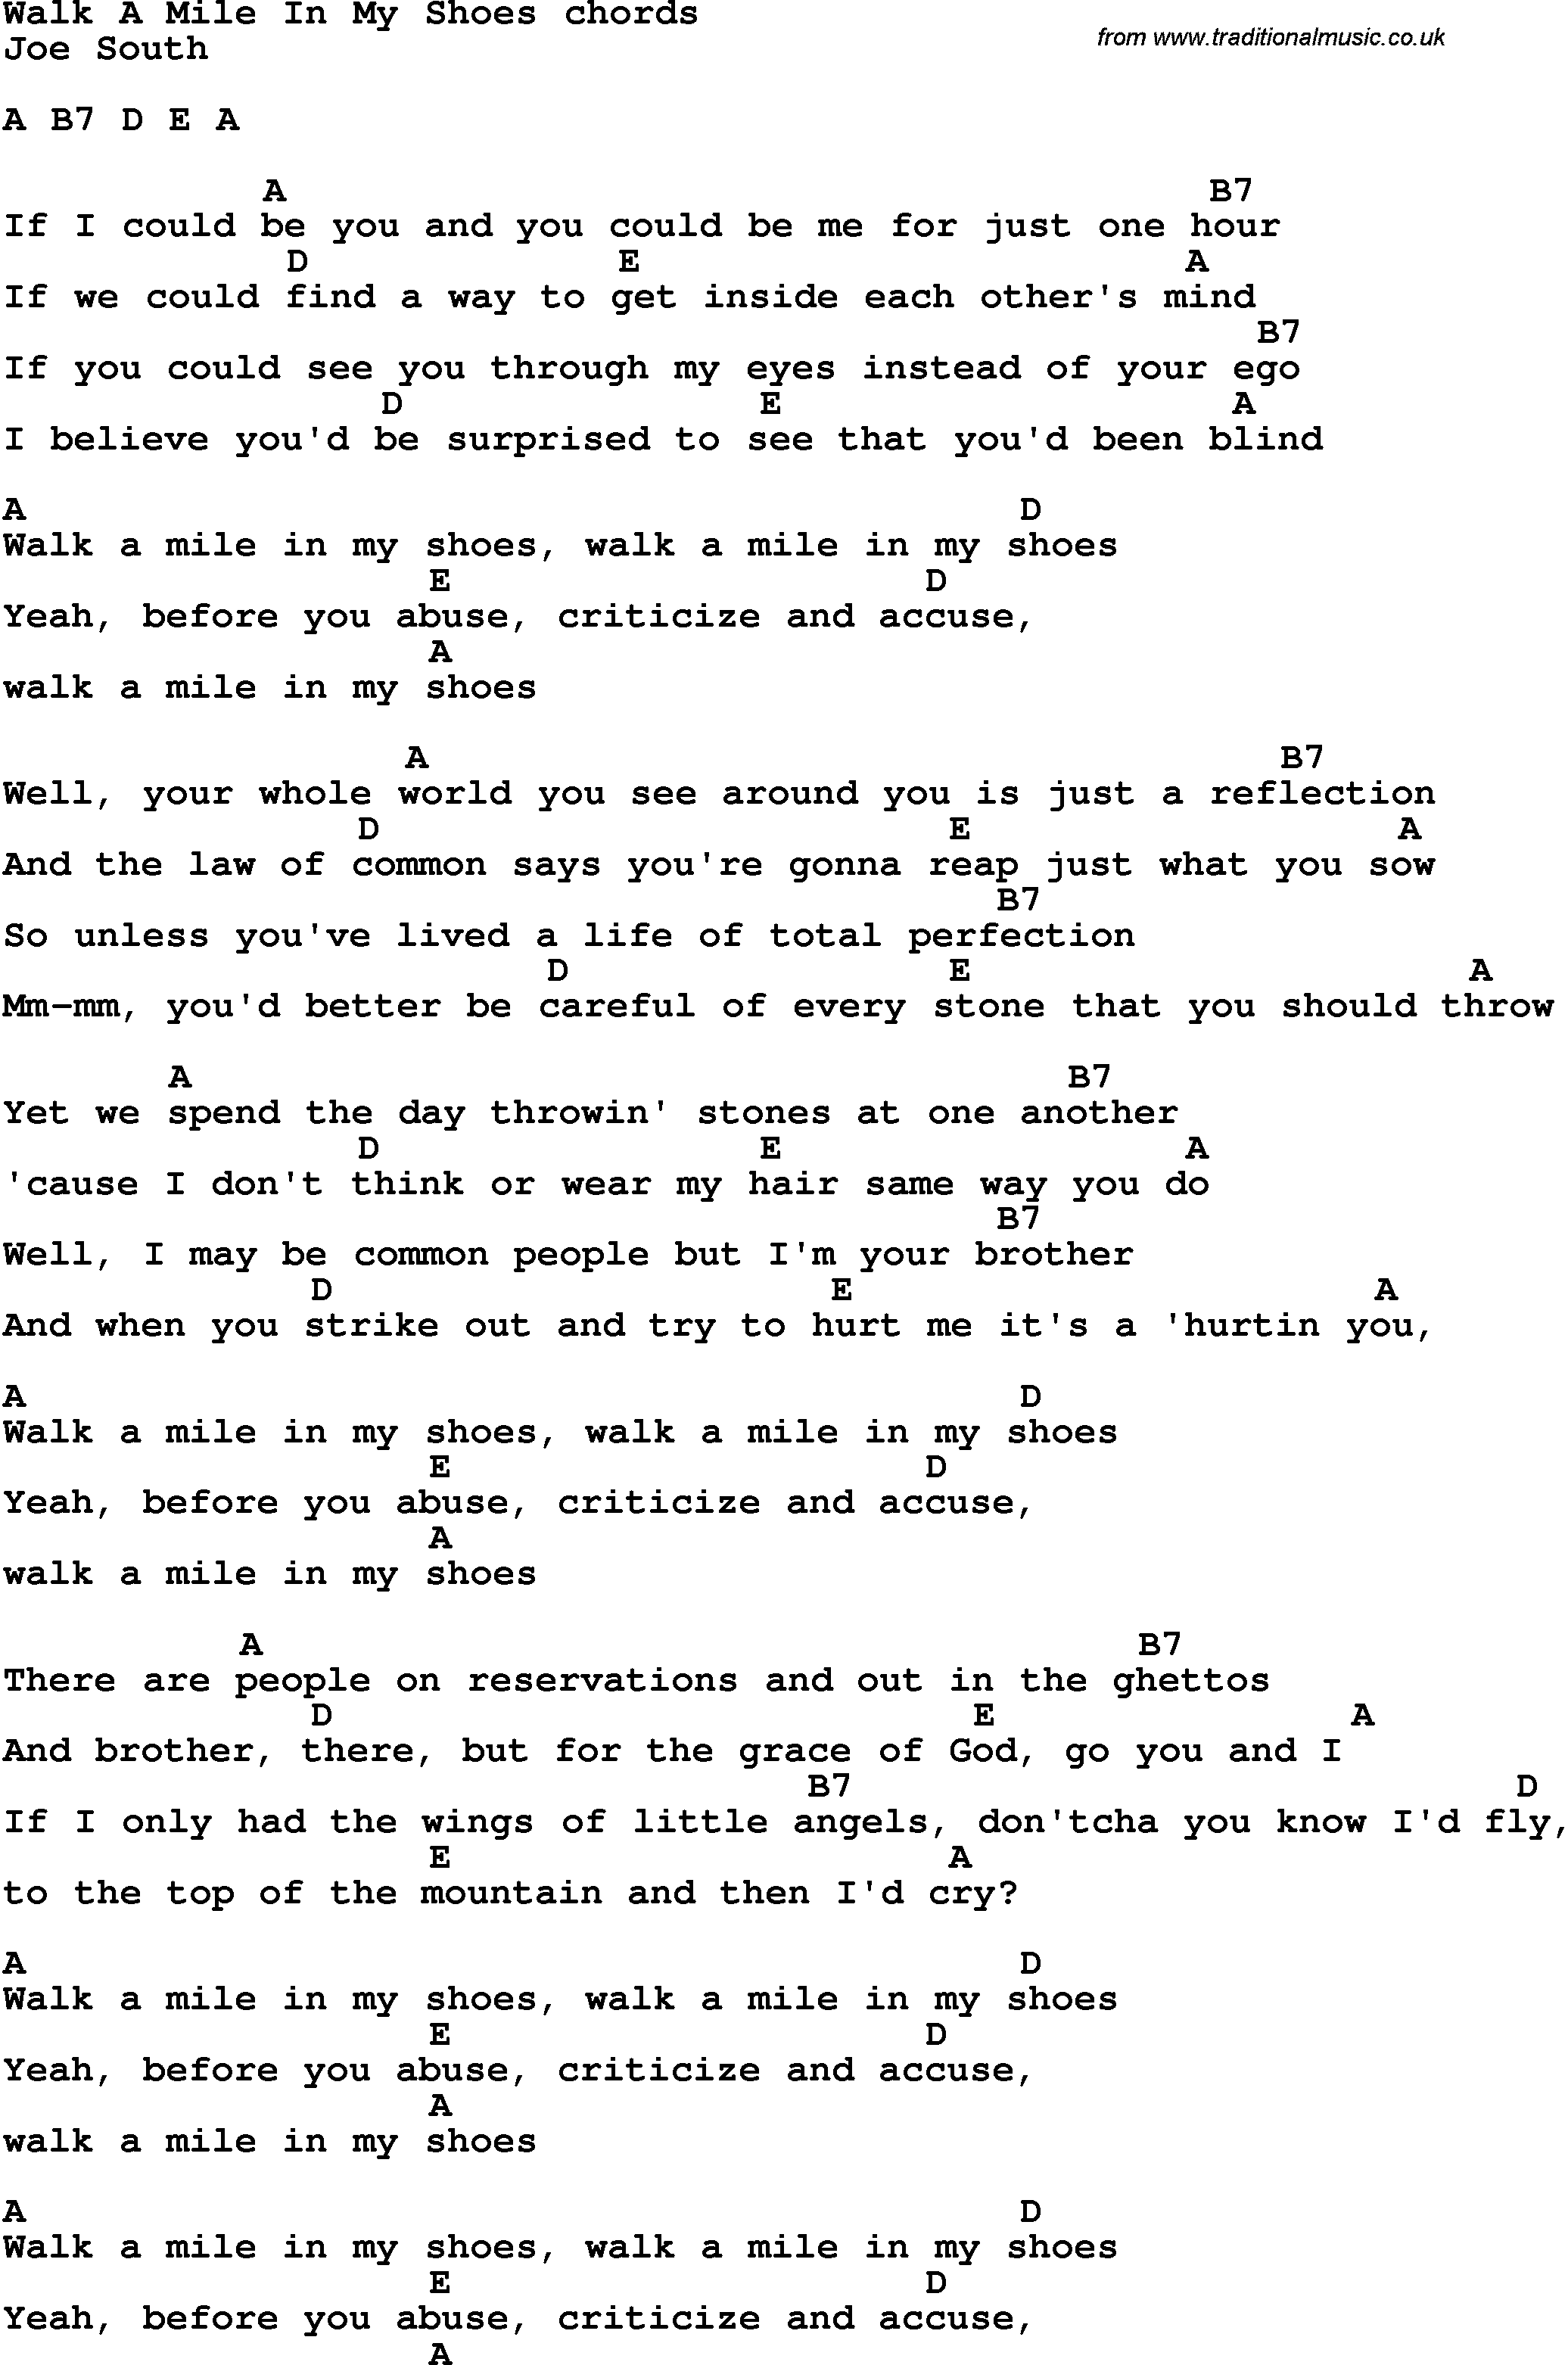 Song Lyrics with guitar chords for Walk A Mile In My Shoes